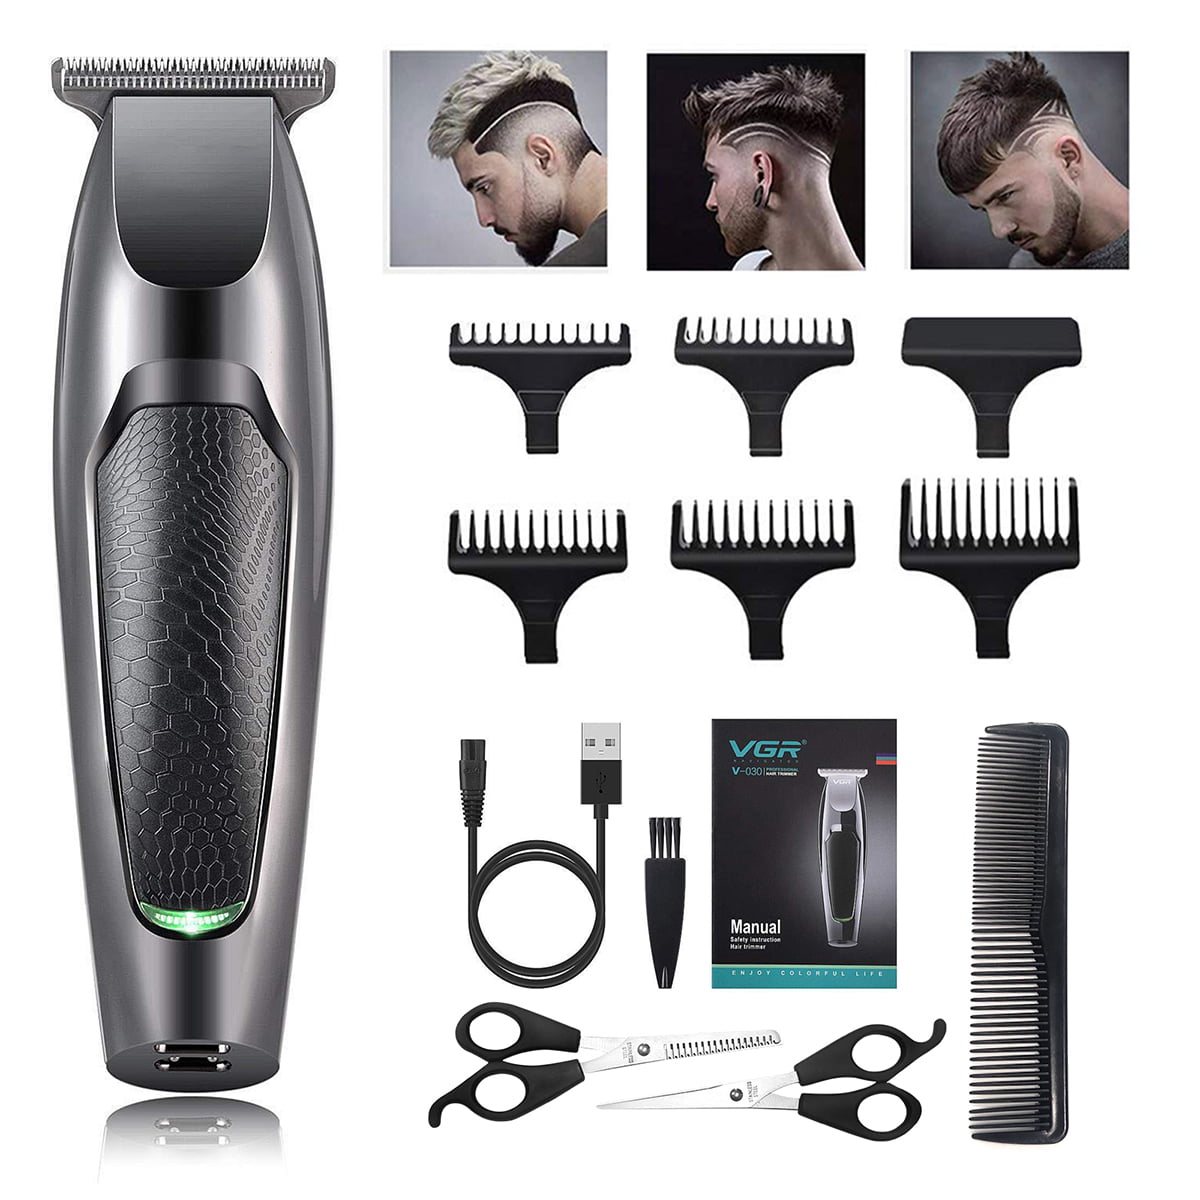 audoc professional cordless hair clippers rechargeable beard trimmer hair kit men